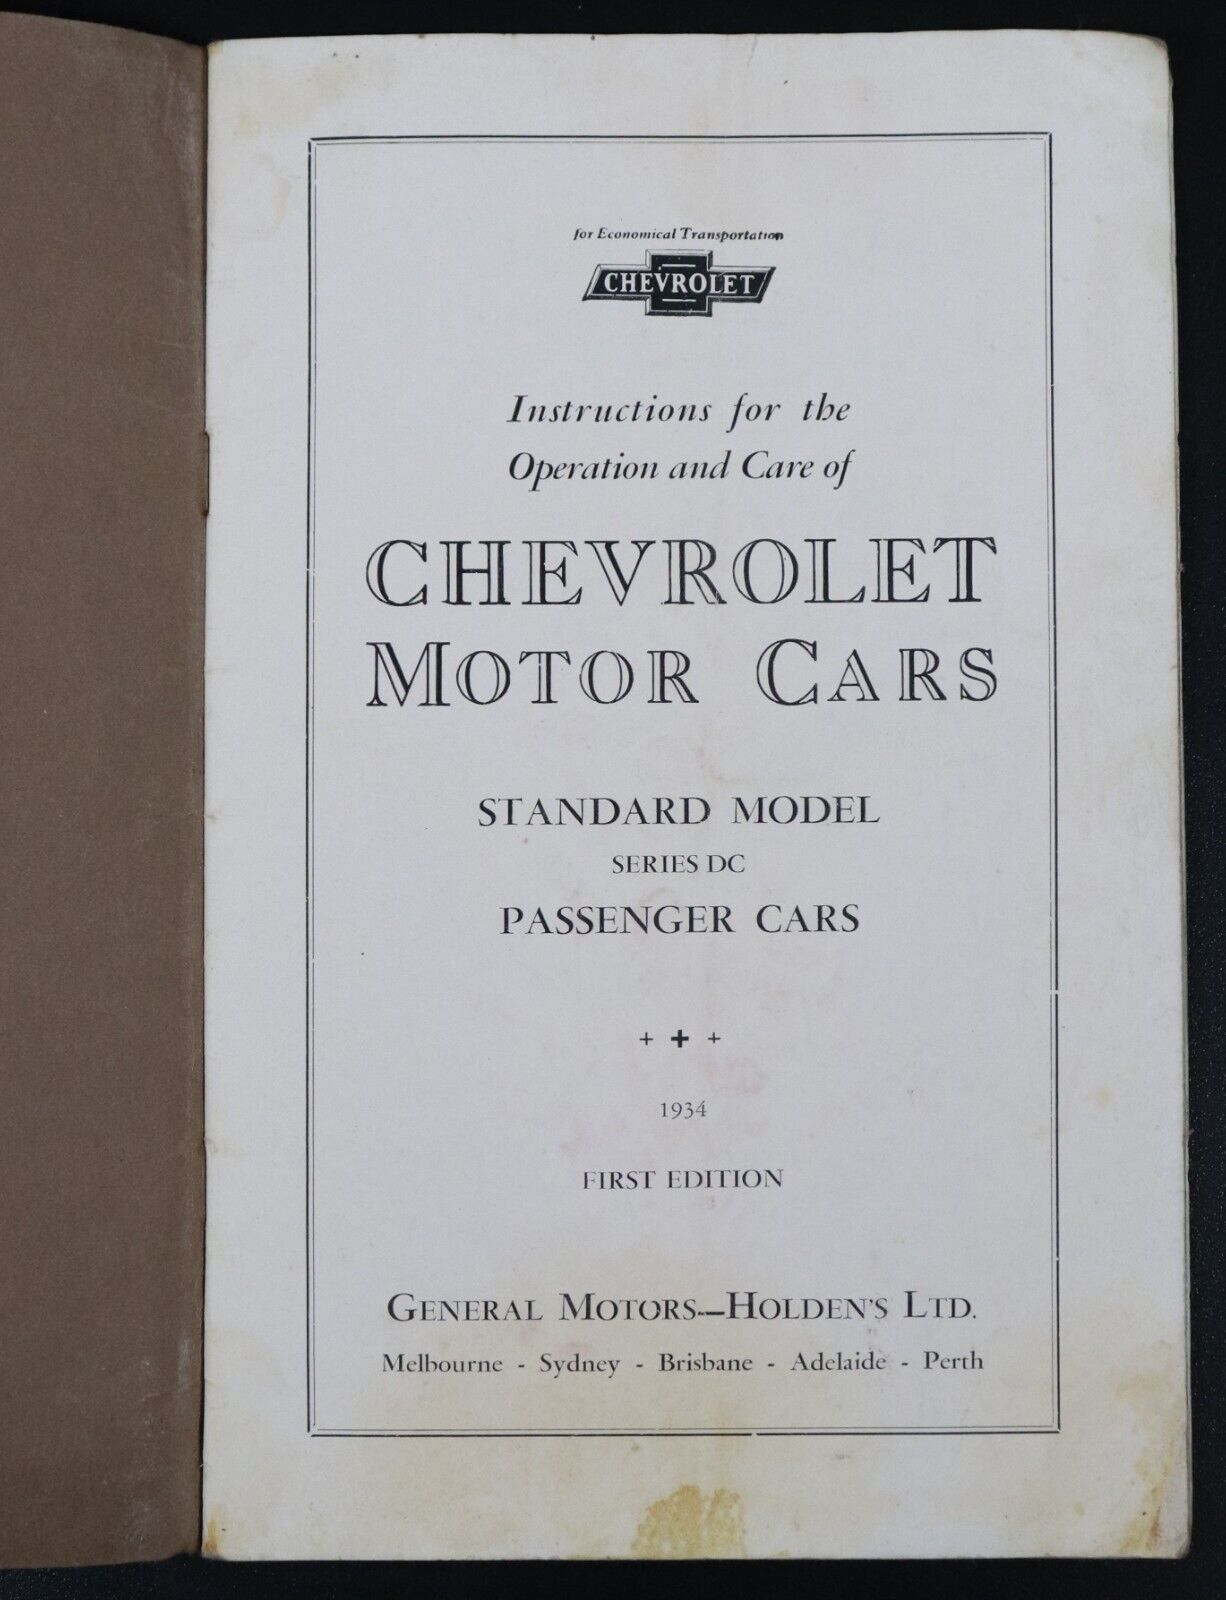 1934 Chevrolet Motor Cars Owners Manual Automotive Book G.M. Holden's Australia